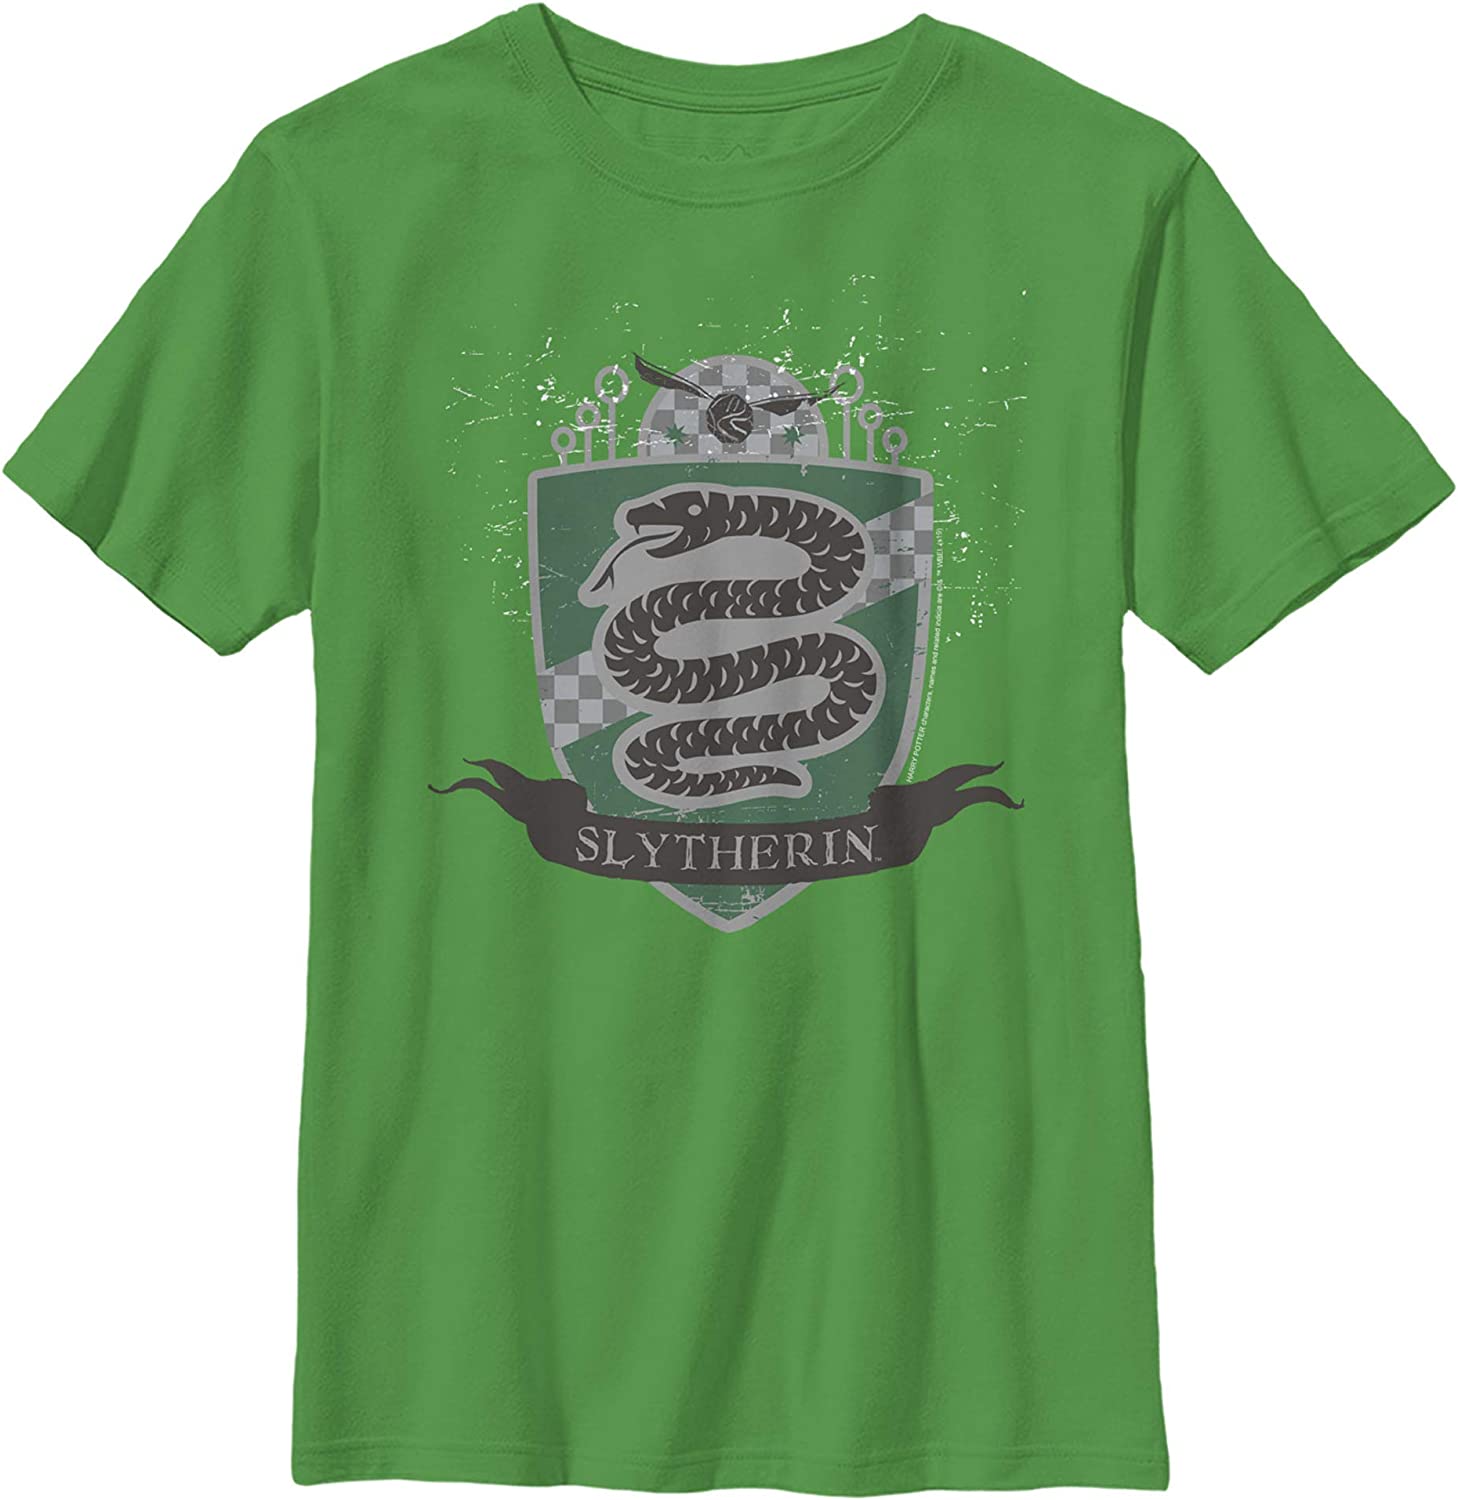 Slytherin House Shield Tee Shirt for Harry Potter Fans IYT